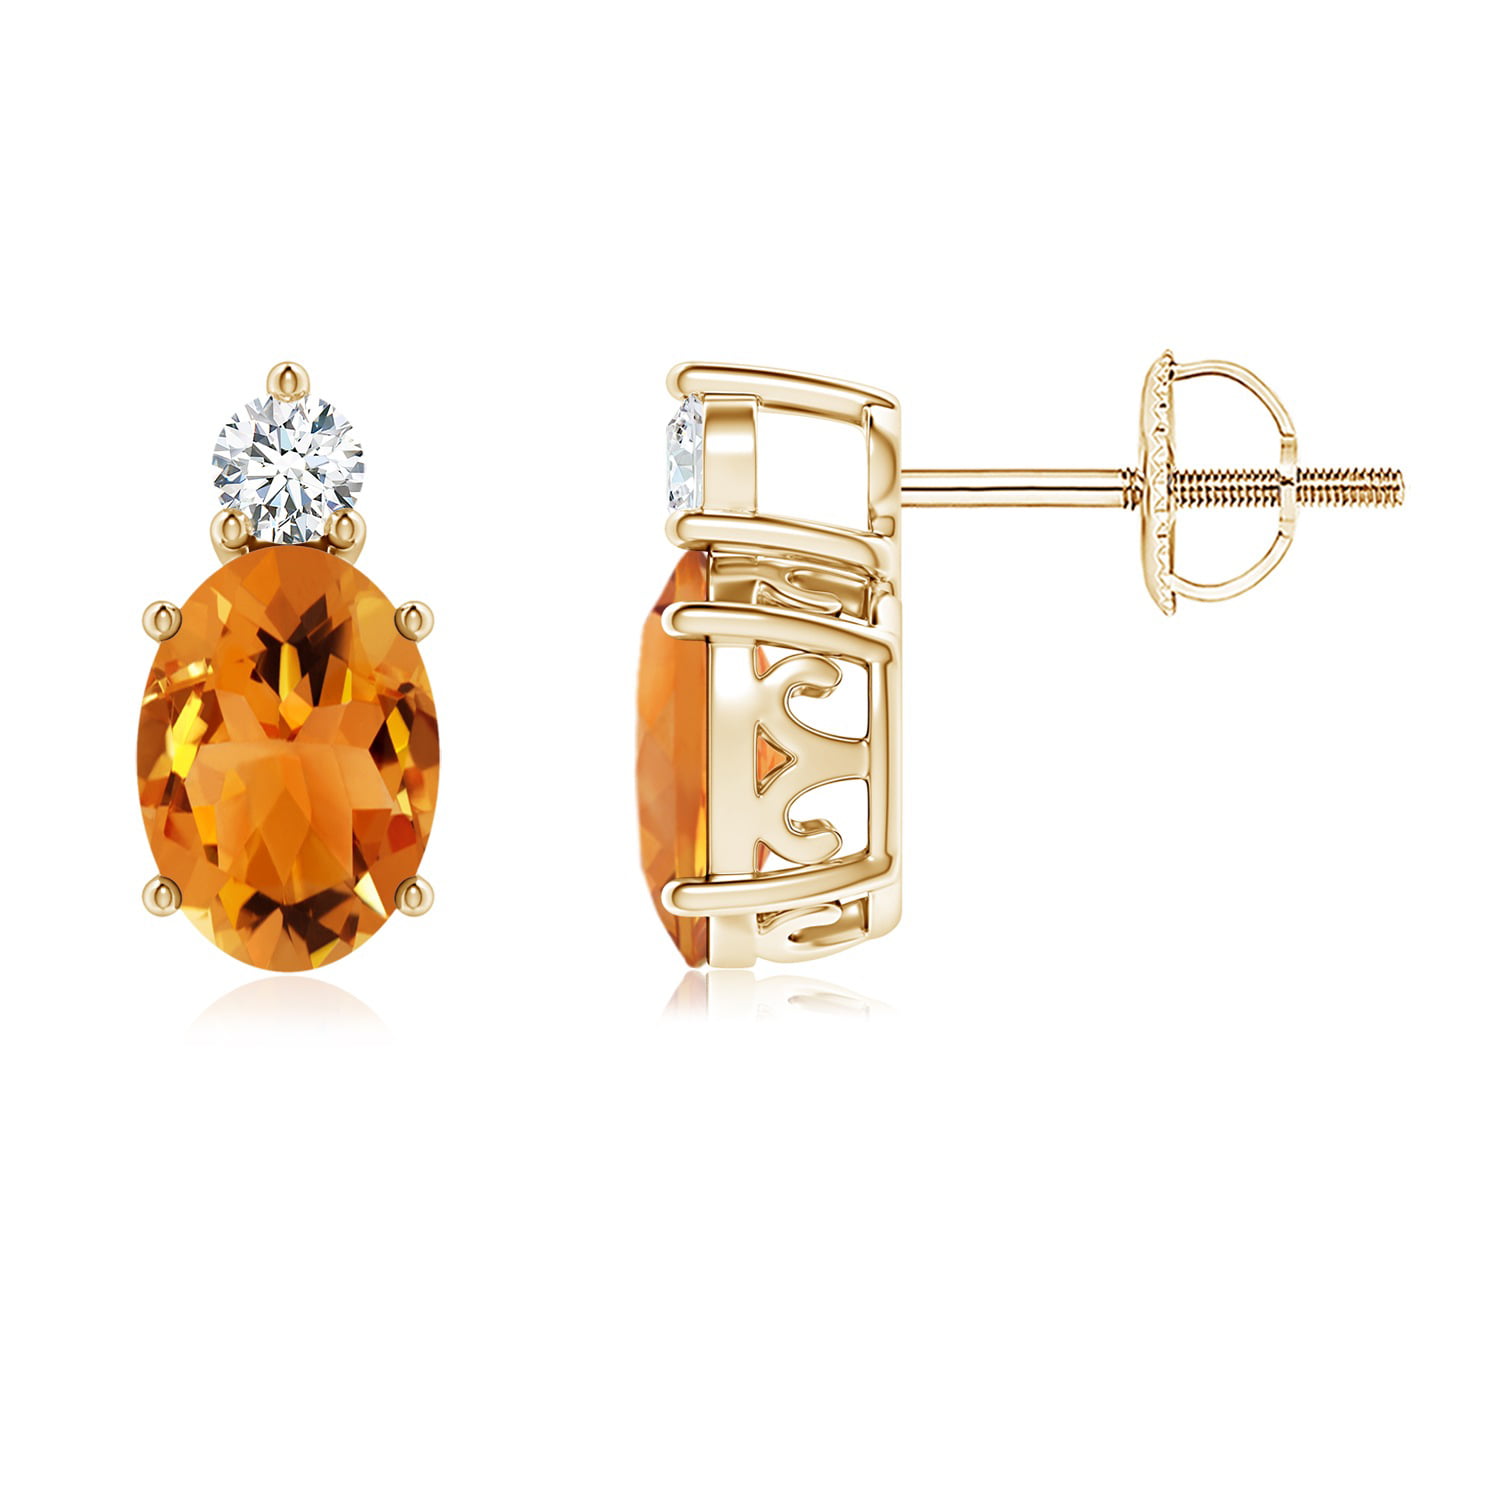 Details about   New 14k Gold Birthstone Baby Ball Stud Earrings-Free Shipping! November 